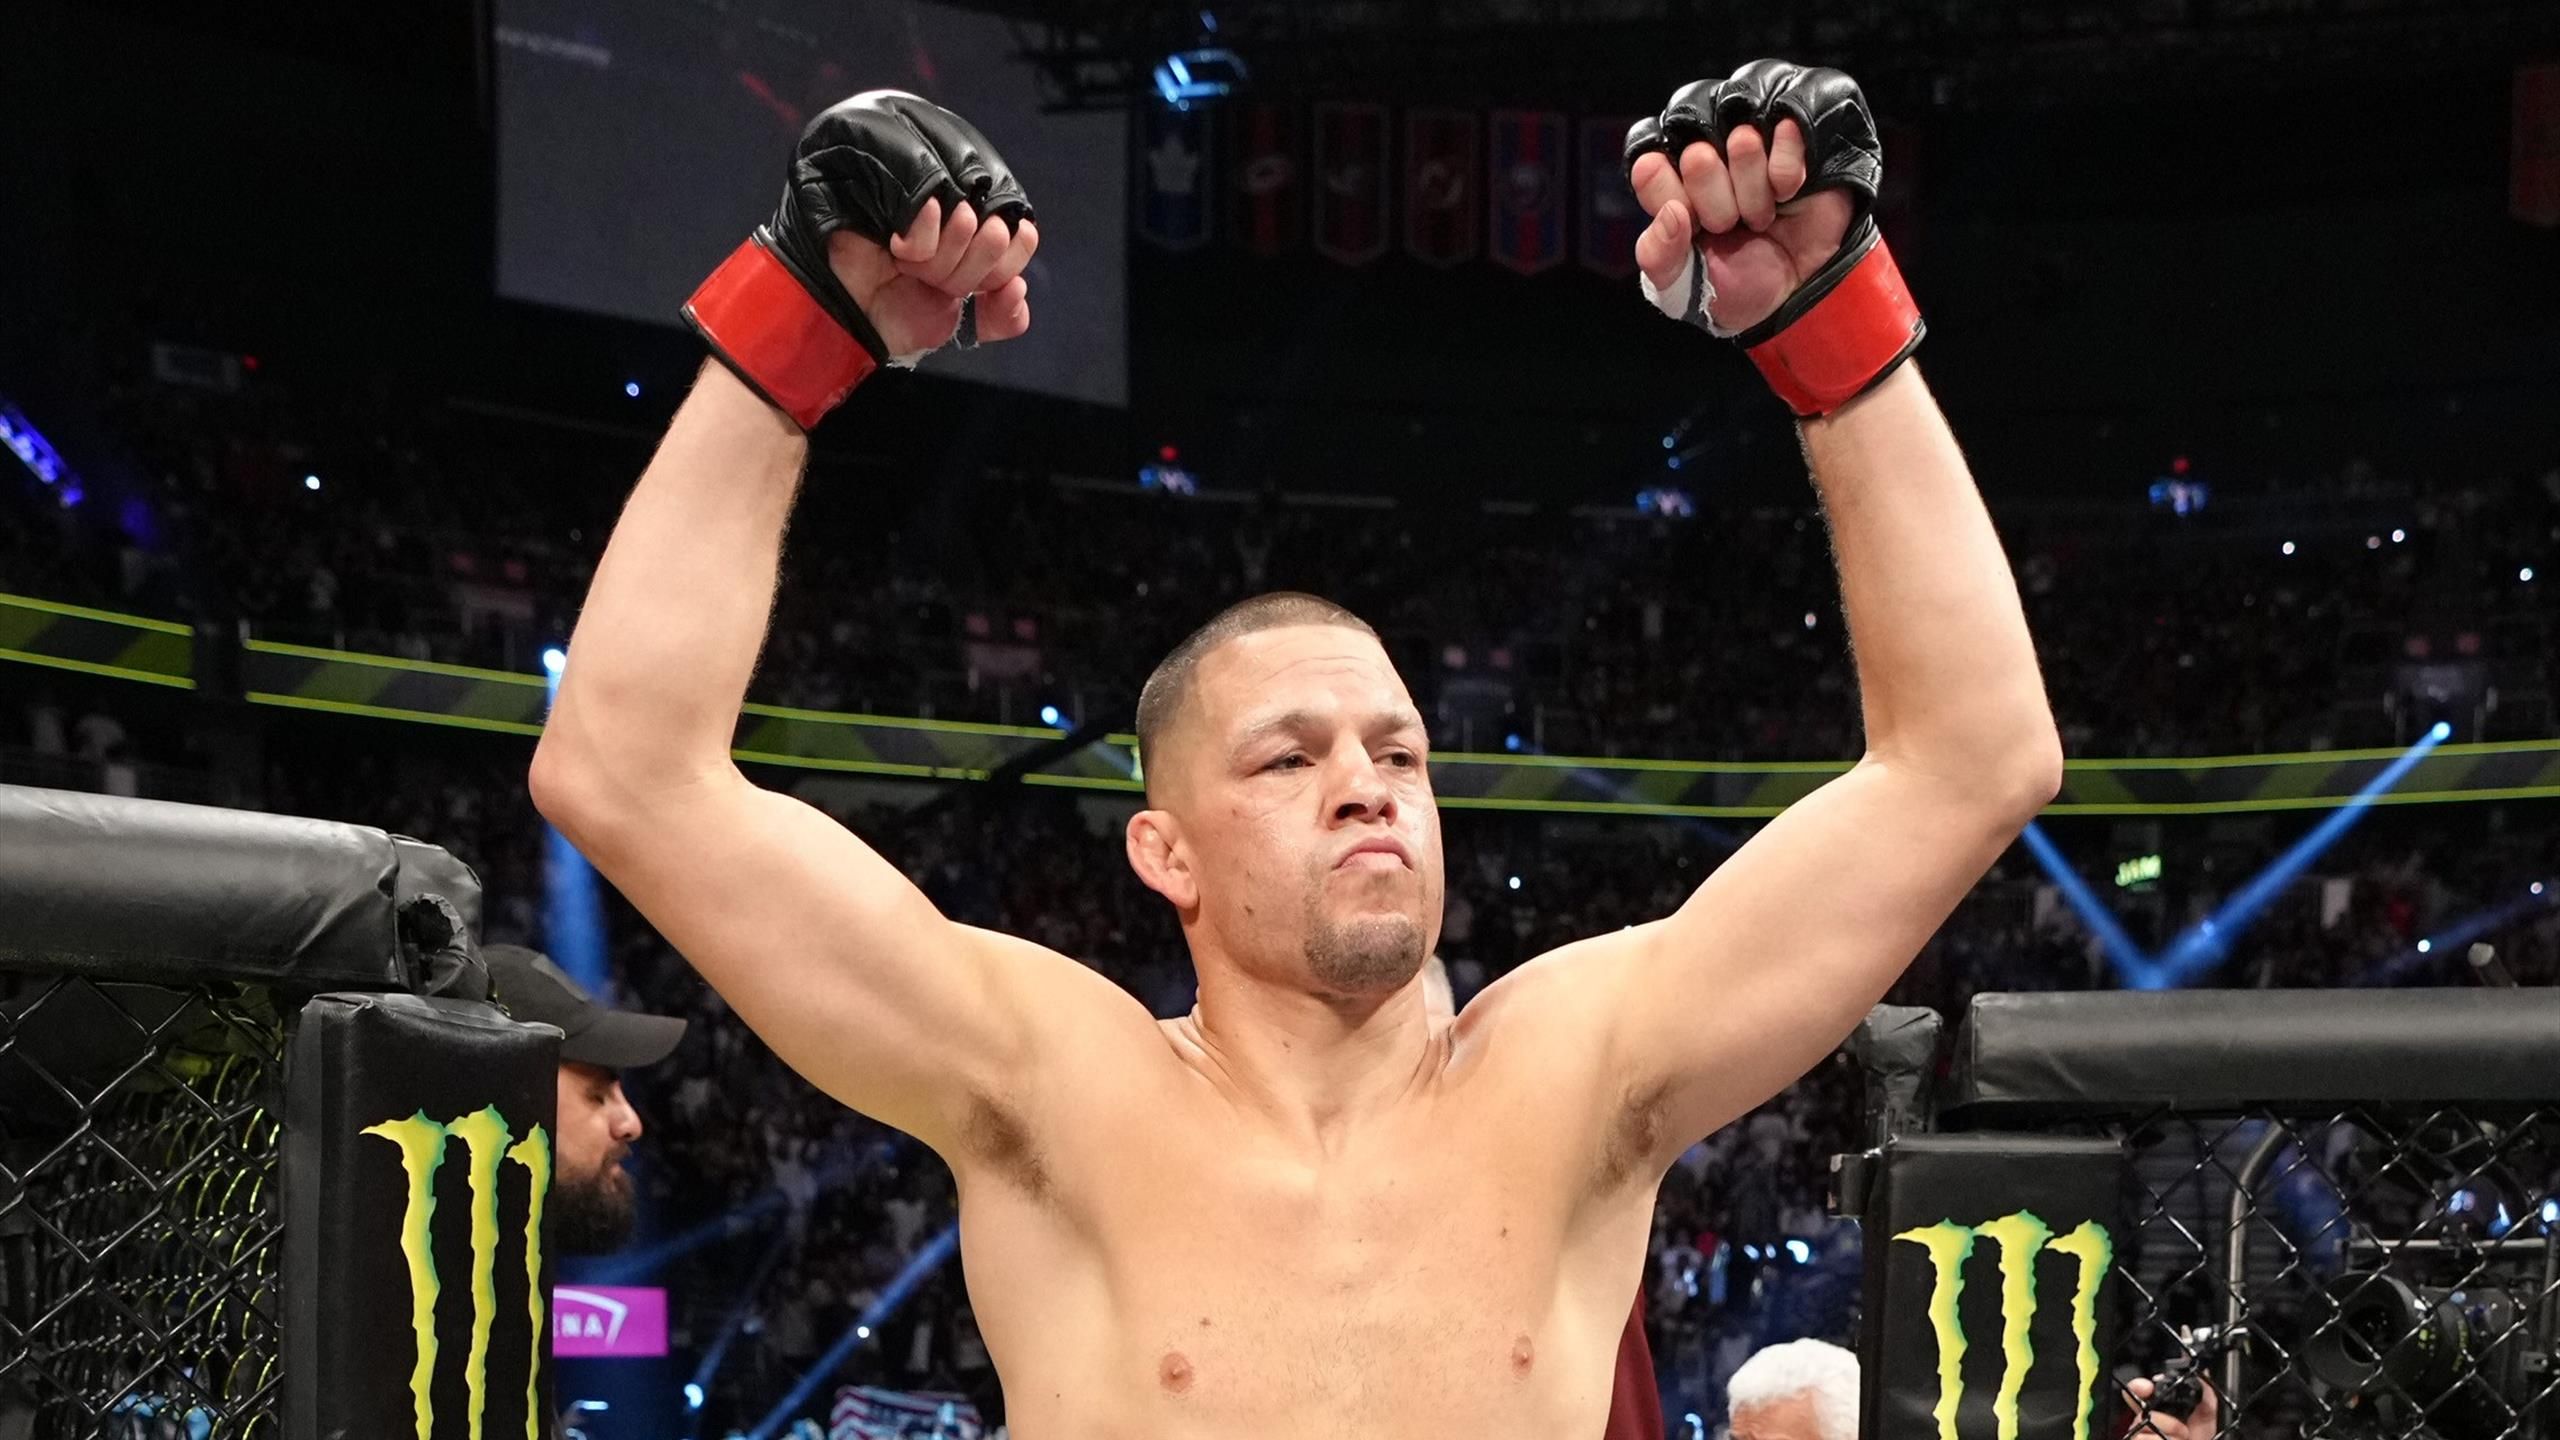 100% - Former UFC fighter Nate Diaz plans mixed martial arts return after Jake Paul boxing match